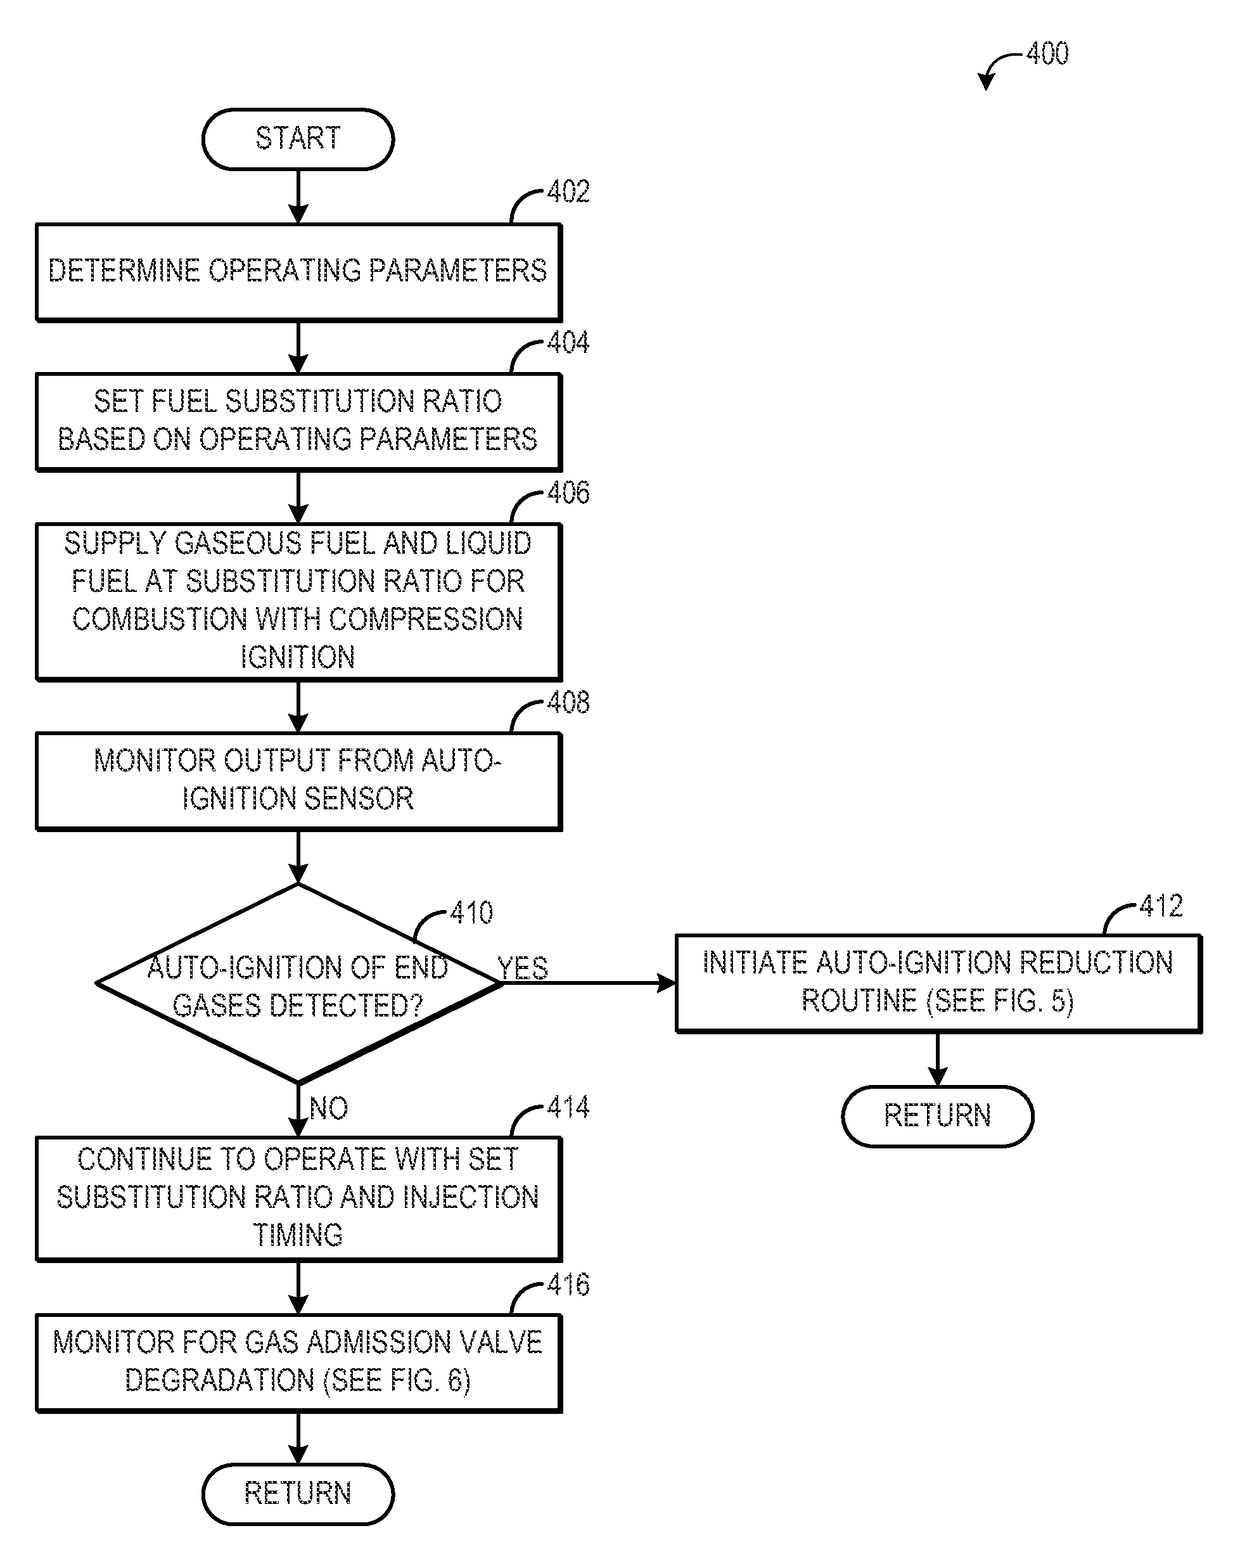 Systems and method for controlling auto-ignition